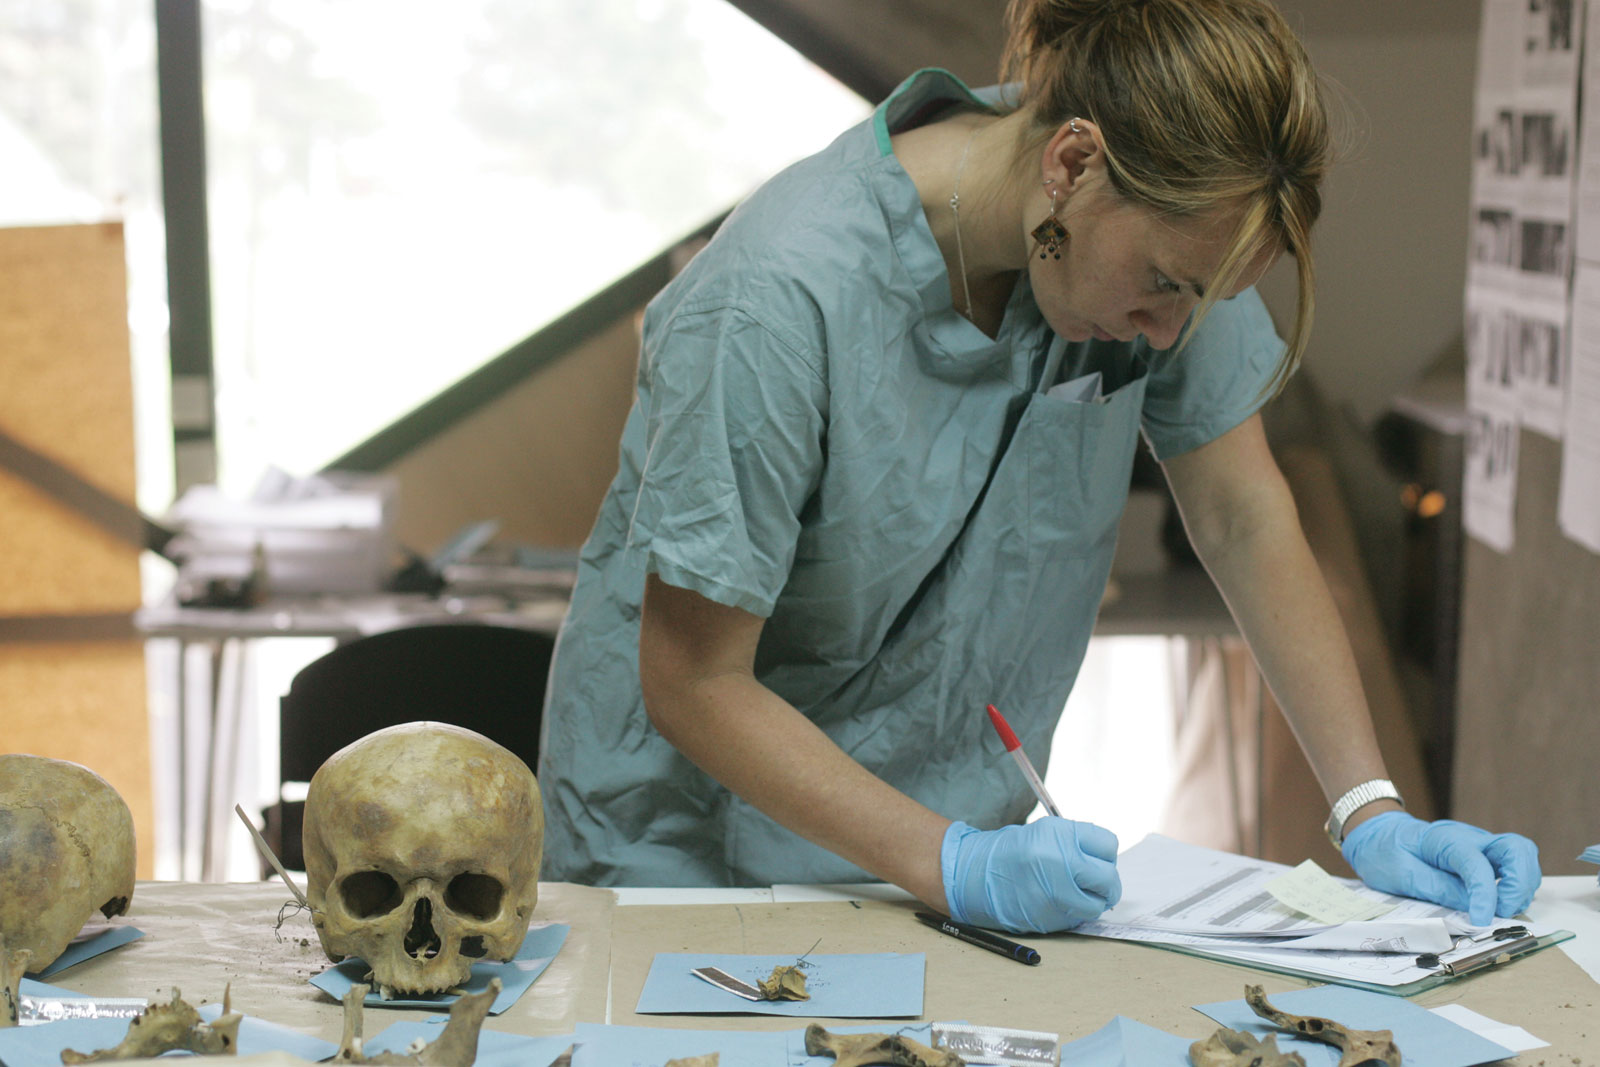 Photo Credit: Forensic Anthropologist